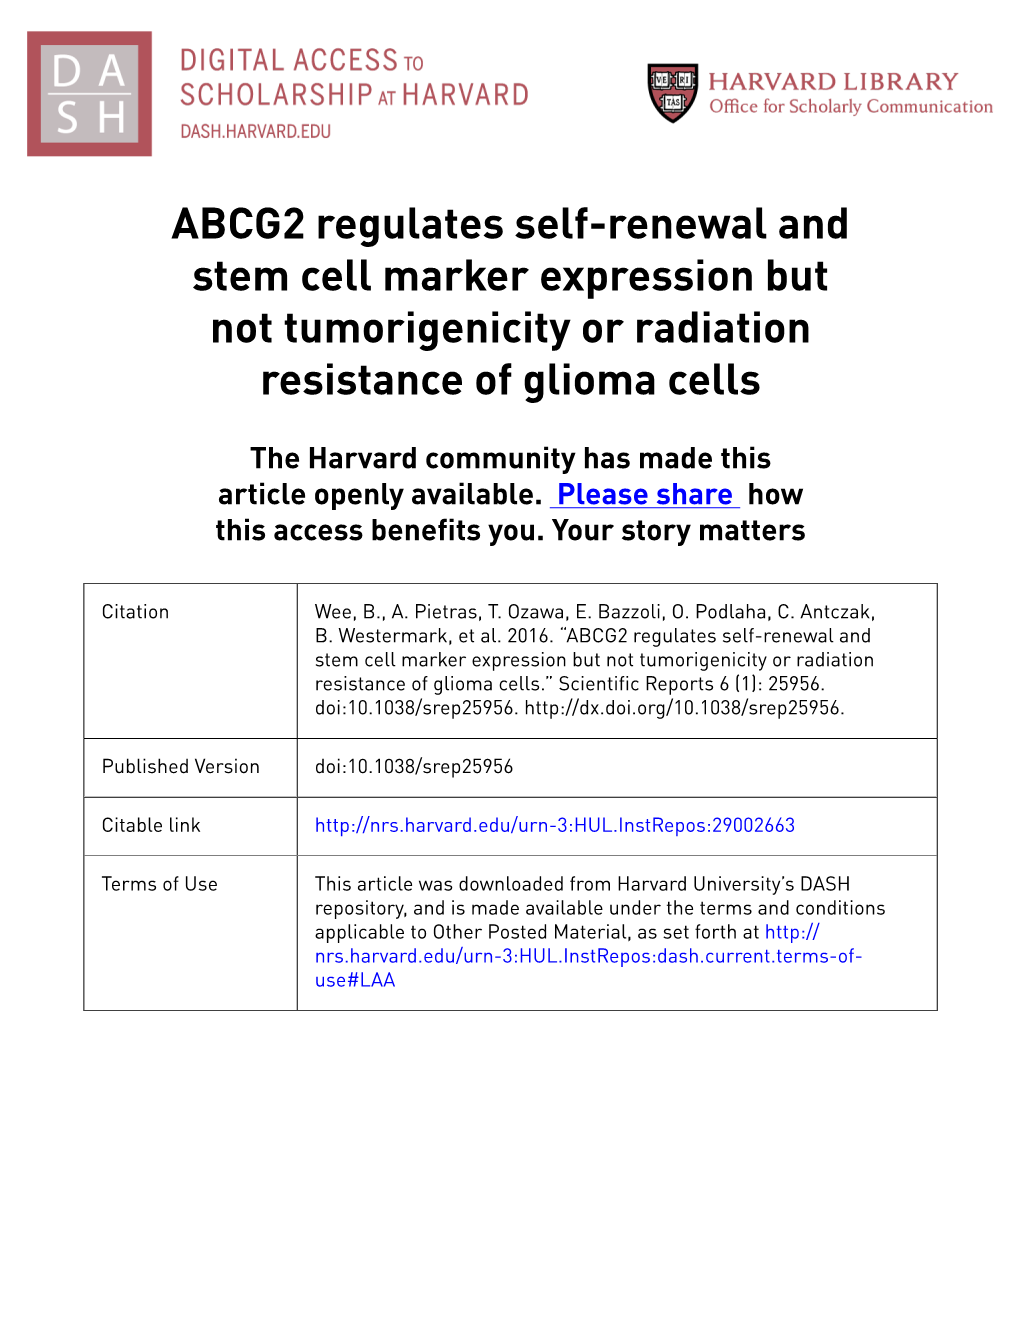 ABCG2 Regulates Self-Renewal and Stem Cell Marker Expression but Not Tumorigenicity Or Radiation Resistance of Glioma Cells